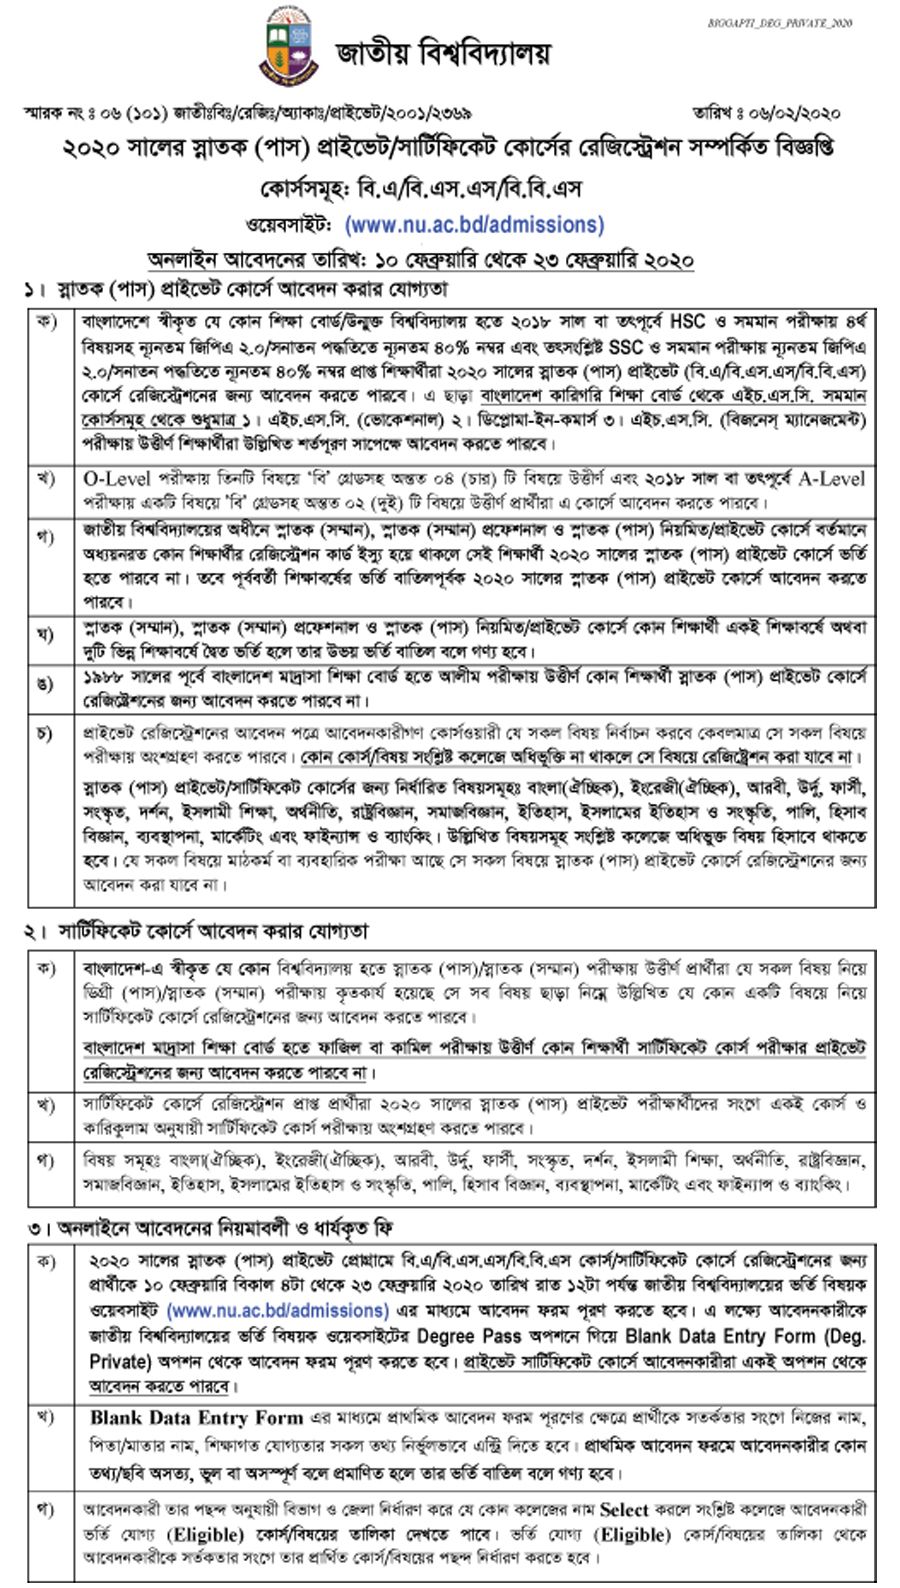 National University Degree Private Admission Circular